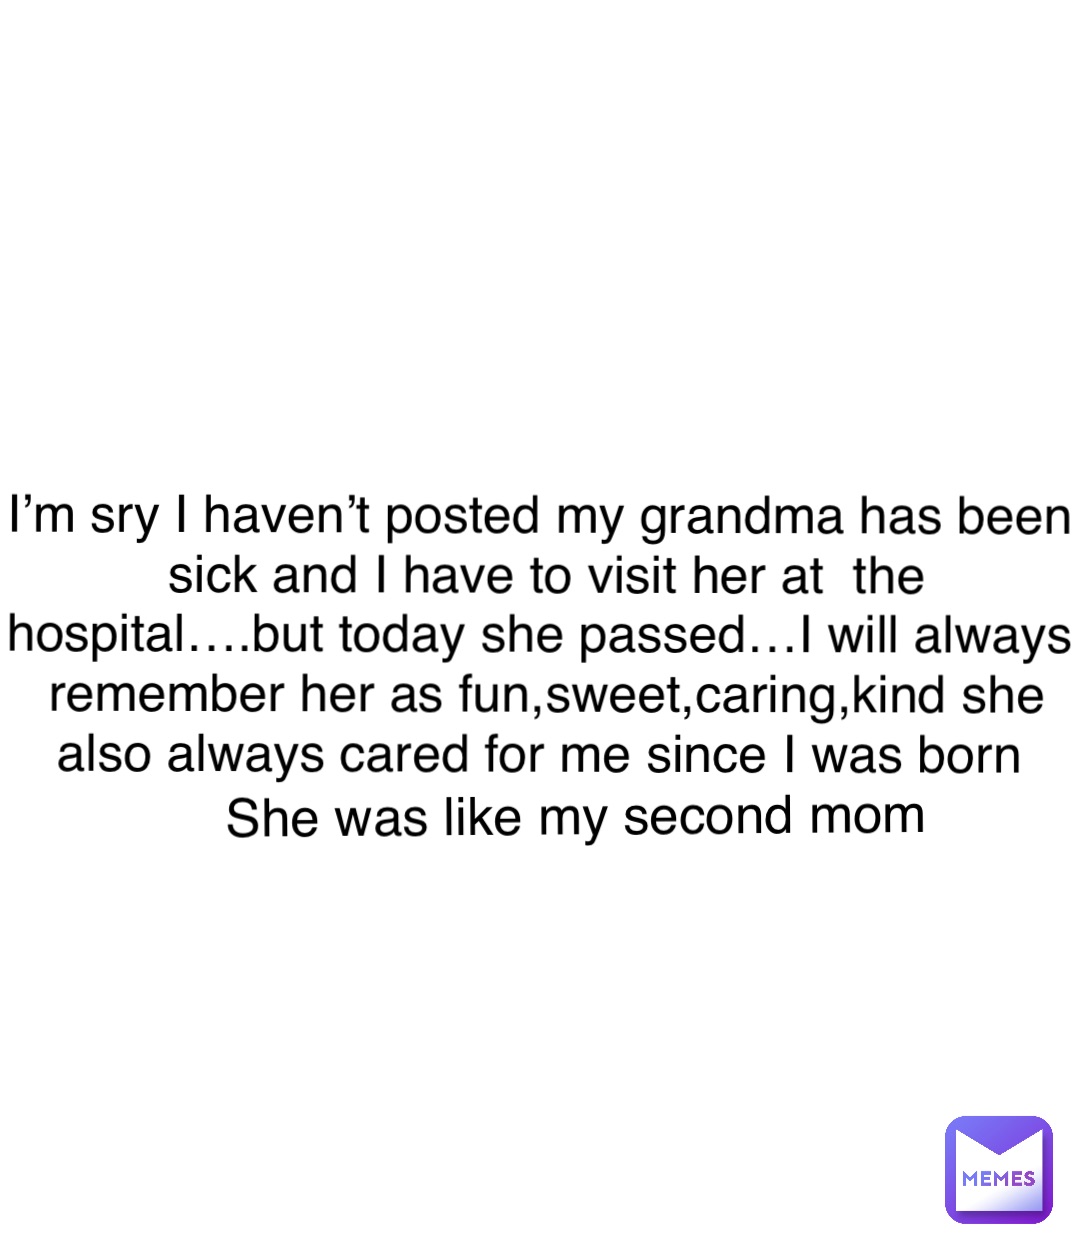 Double tap to edit I’m sry I haven’t posted my grandma has been sick and I have to visit her at  the hospital….but today she passed…I will always remember her as fun,sweet,caring,kind she also always cared for me since I was born She was like my second mom